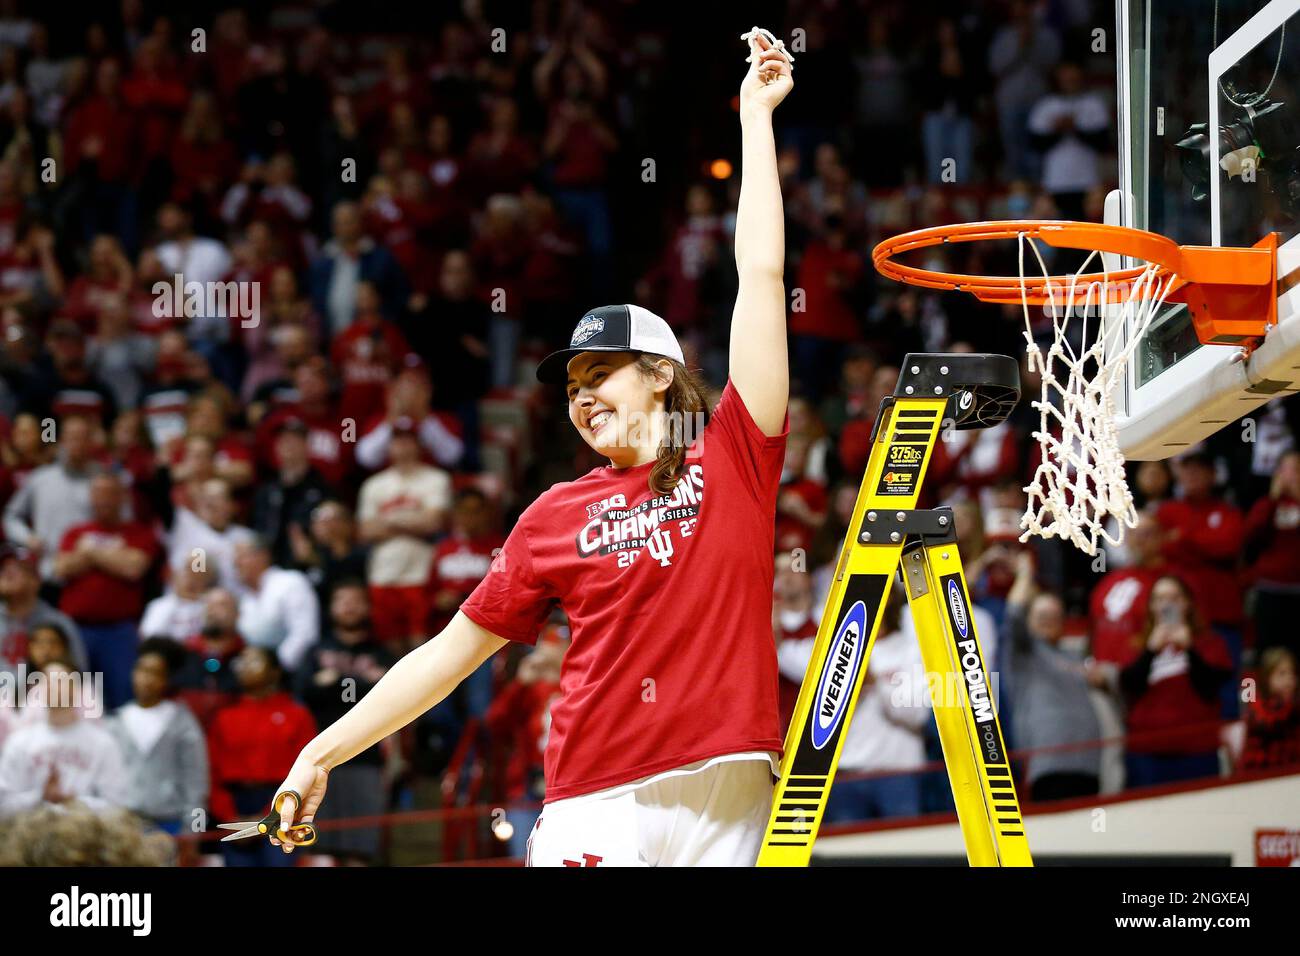 BLOOMINGTON, IN - FEBRUARY 19: Indiana Hoosiers forward Mackenzie Holmes  (54) celebrates winning the regular season Big Ten Title during a women's  college basketball game between the Purdue Boilermakers and the Indiana